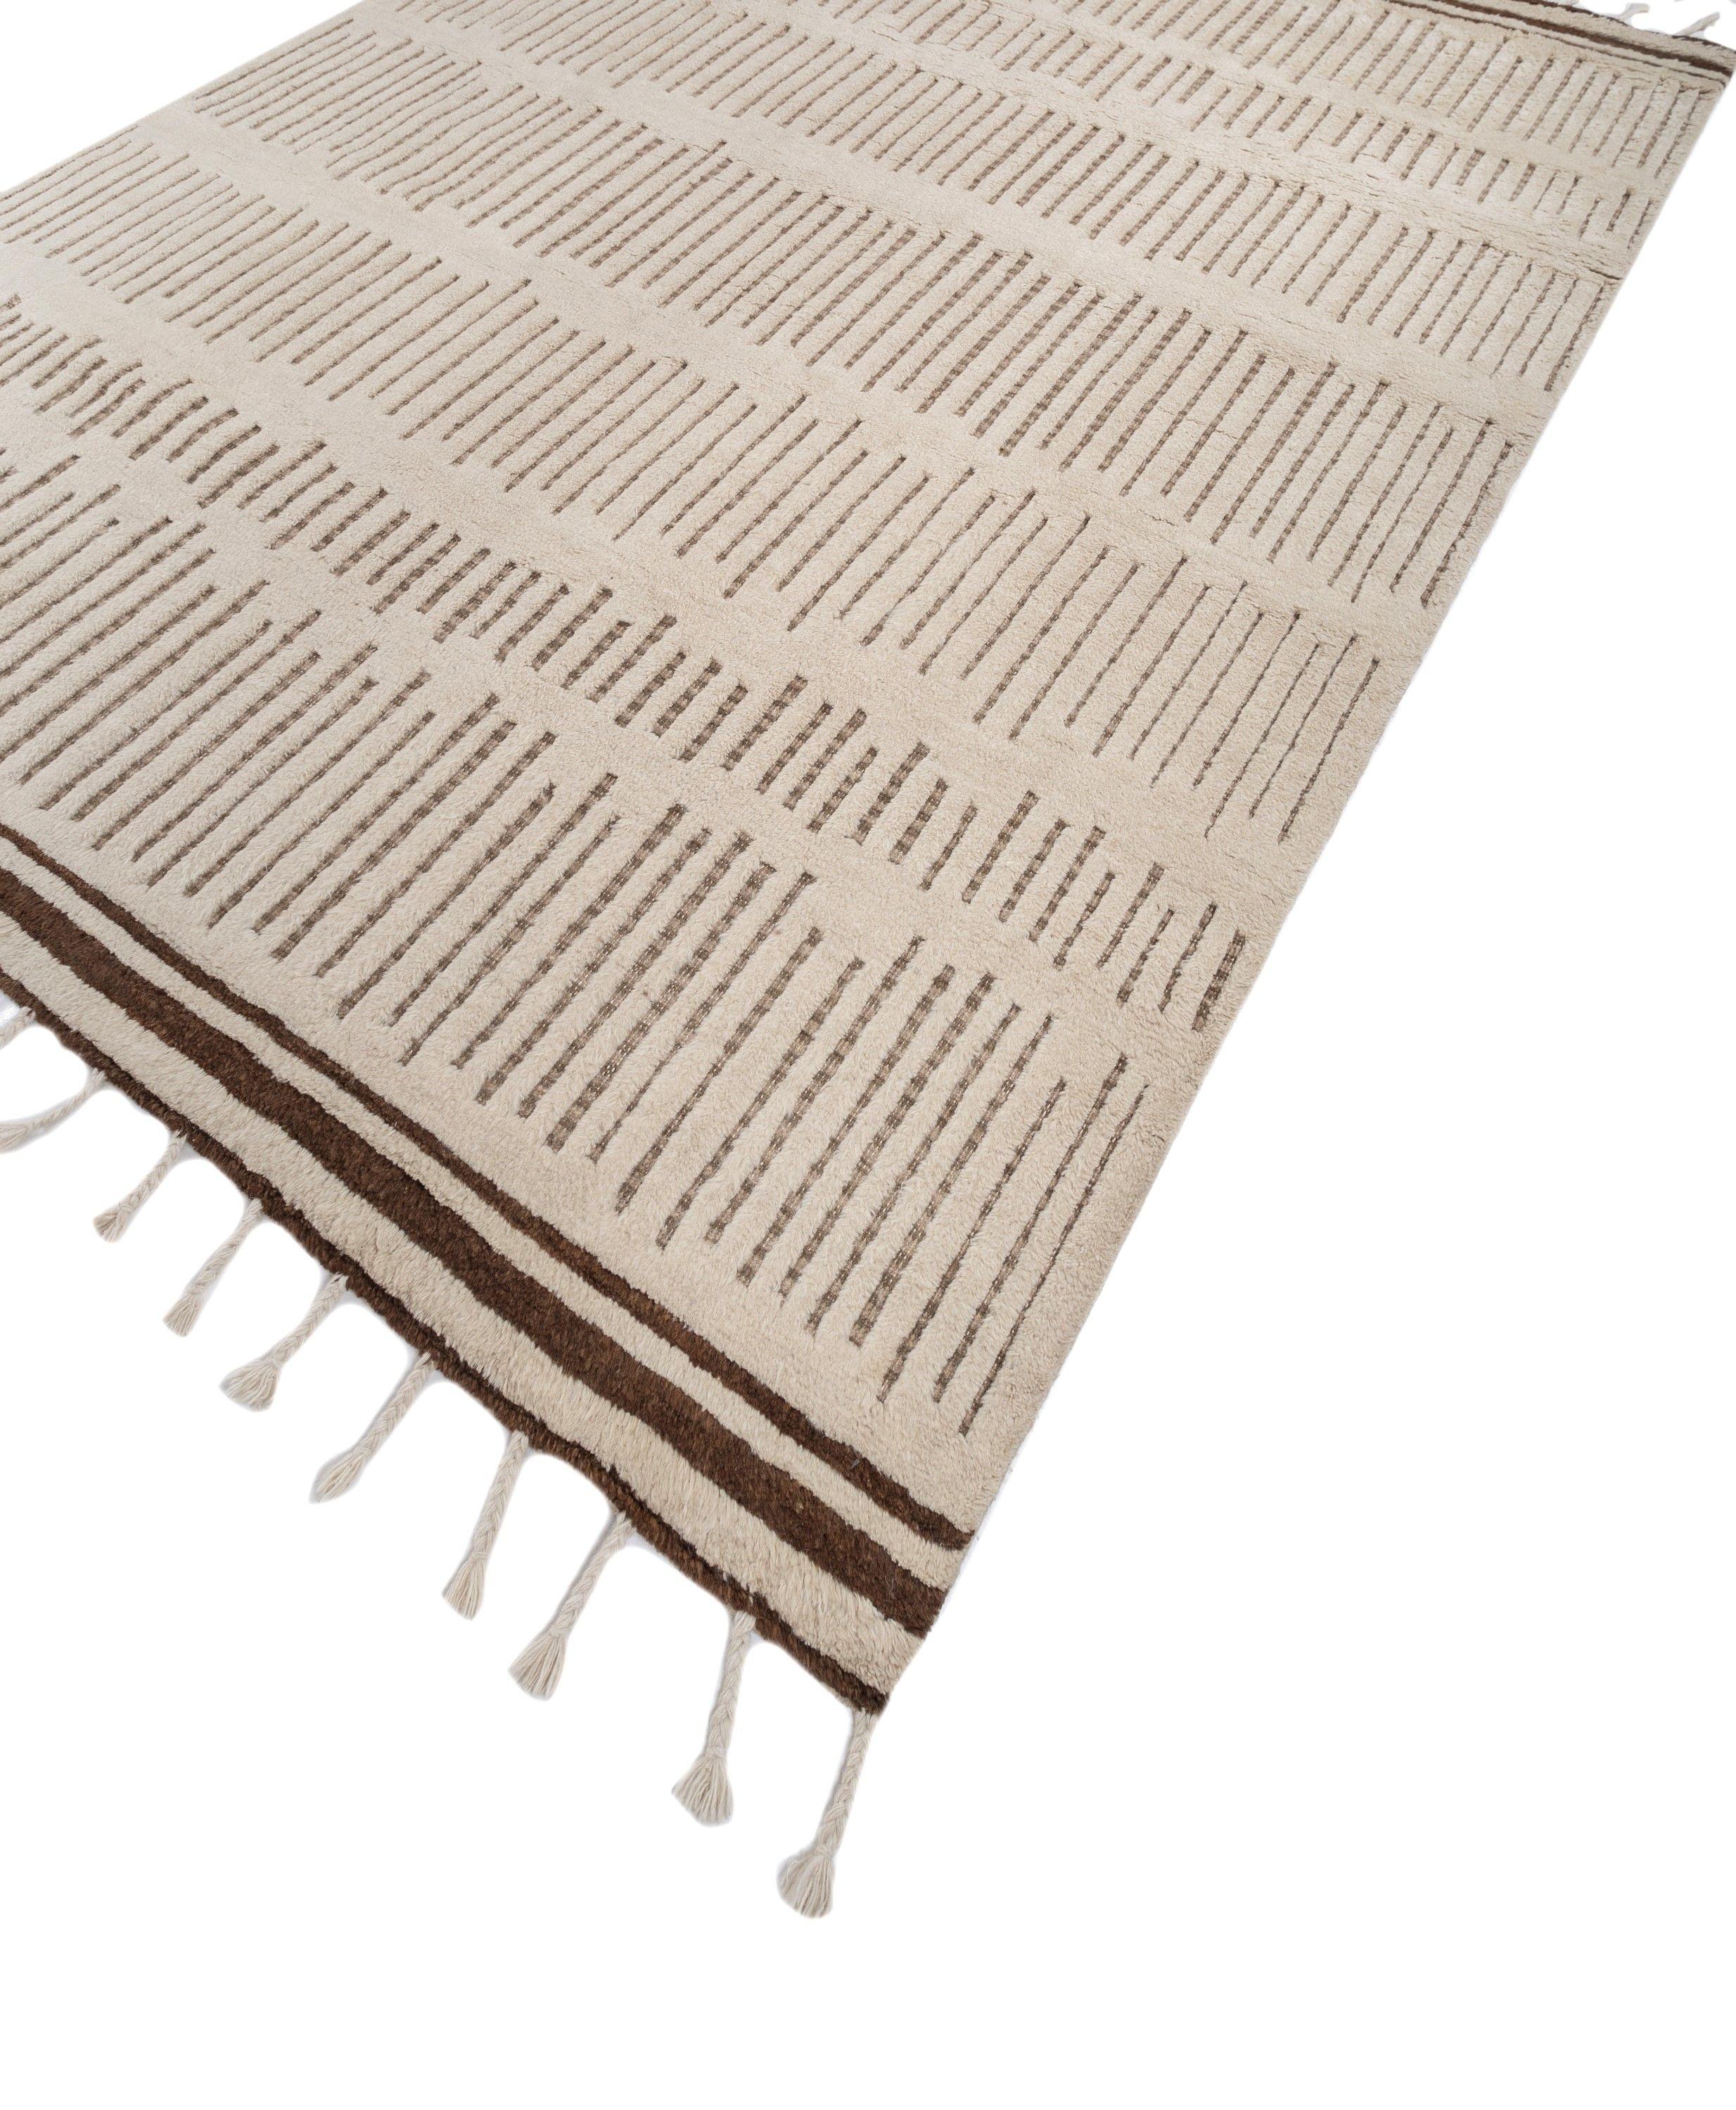 Modern Serenity Veil Cloud White & Clay 240X300 cm Handknotted Rug For Sale